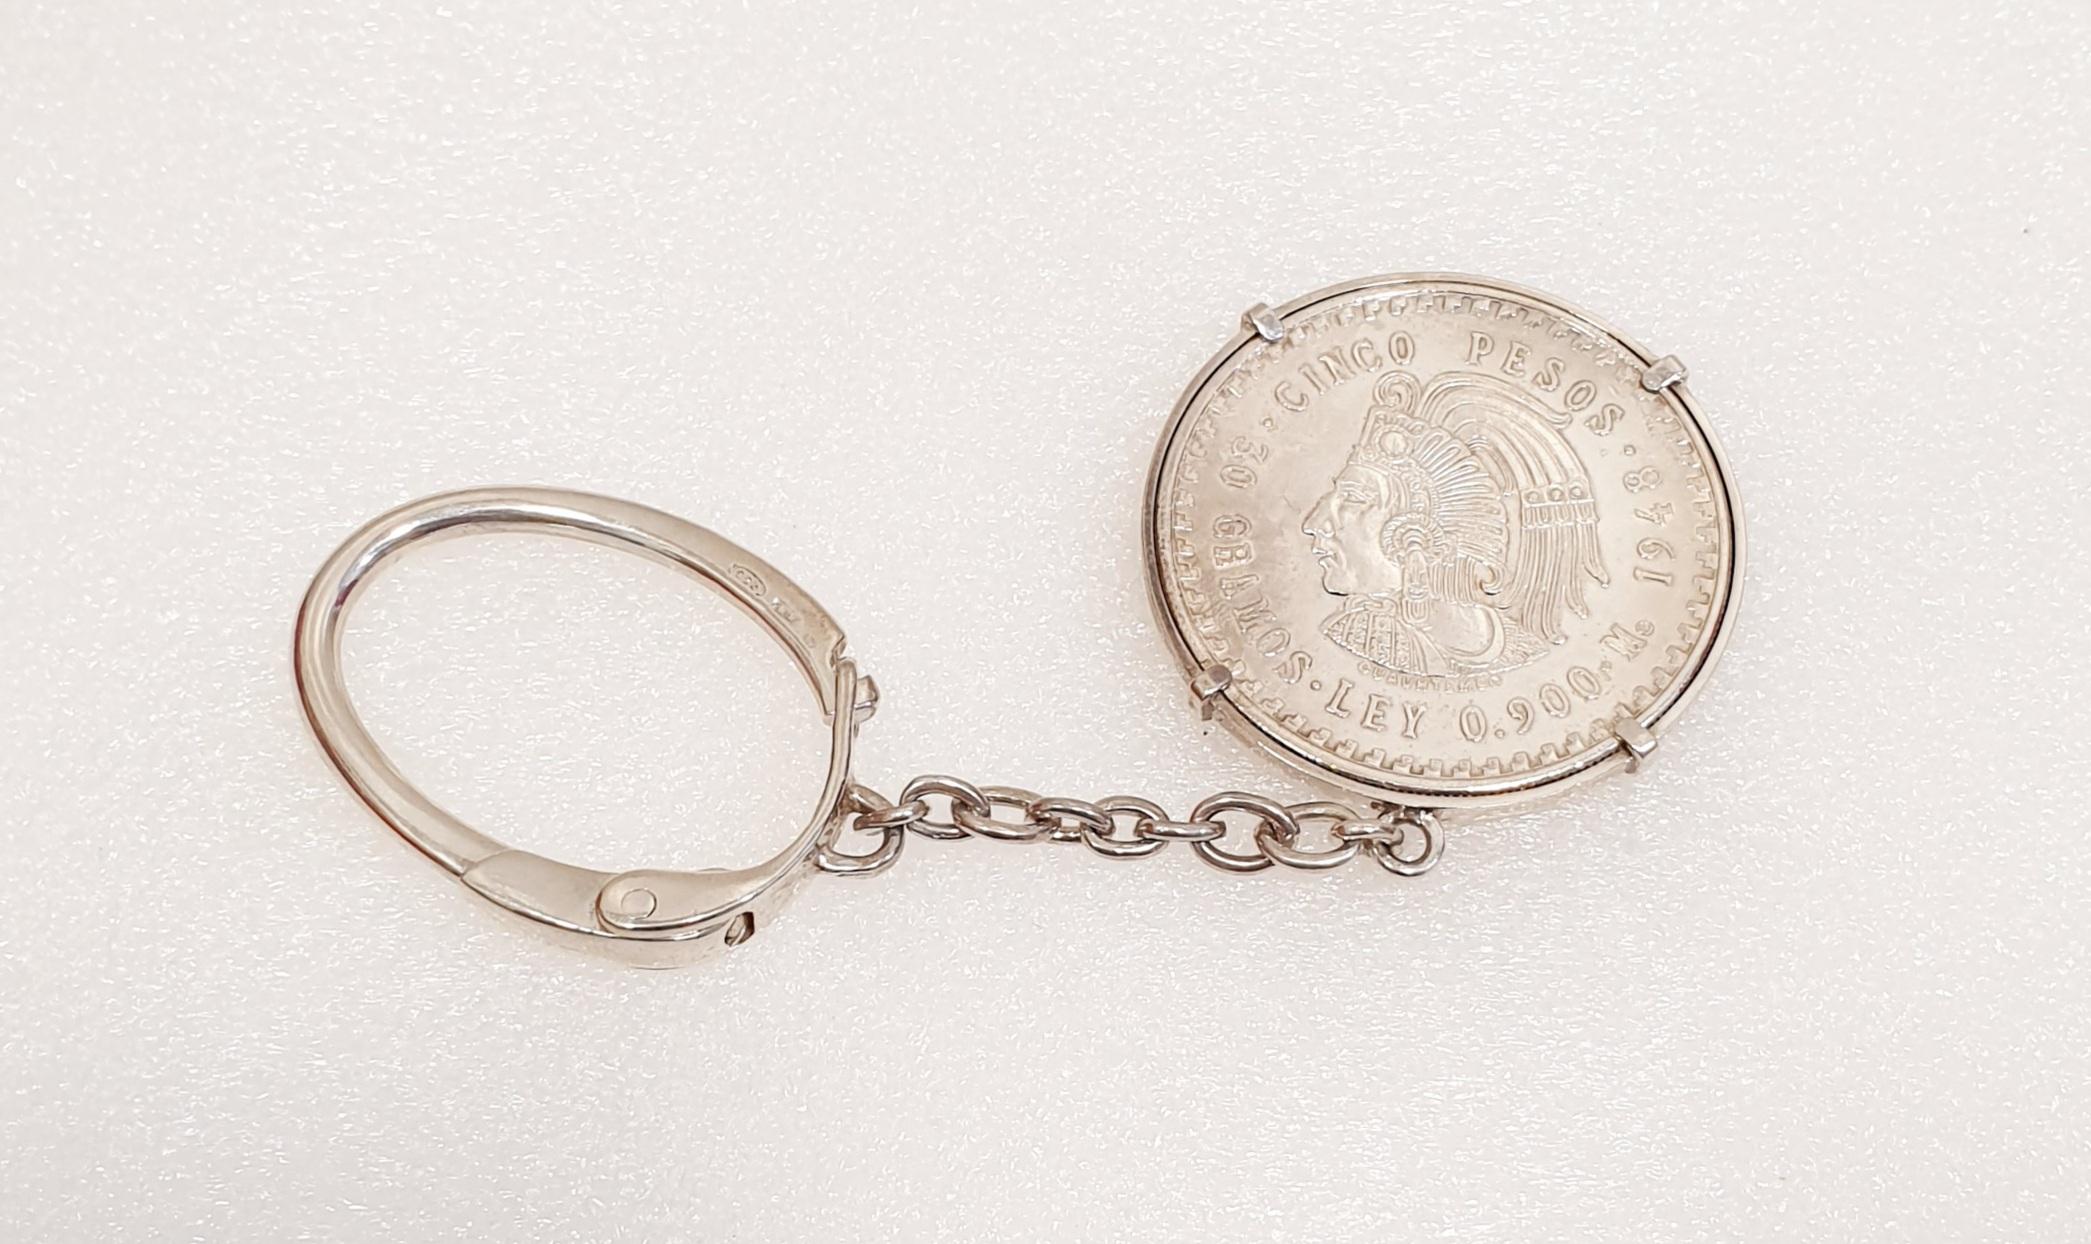 Silver Coin 5 Pesos 1947 Cuauhtemoc In Its Key Ring
Five Pesos Cuauhtémoc silver coin, year 1947, with its original shine in its Key Ring
Weight: 30 grams.      
Coin Diameter  4cm
Key ring length  12,5cm
For two years in the late 1940s, the Mexican